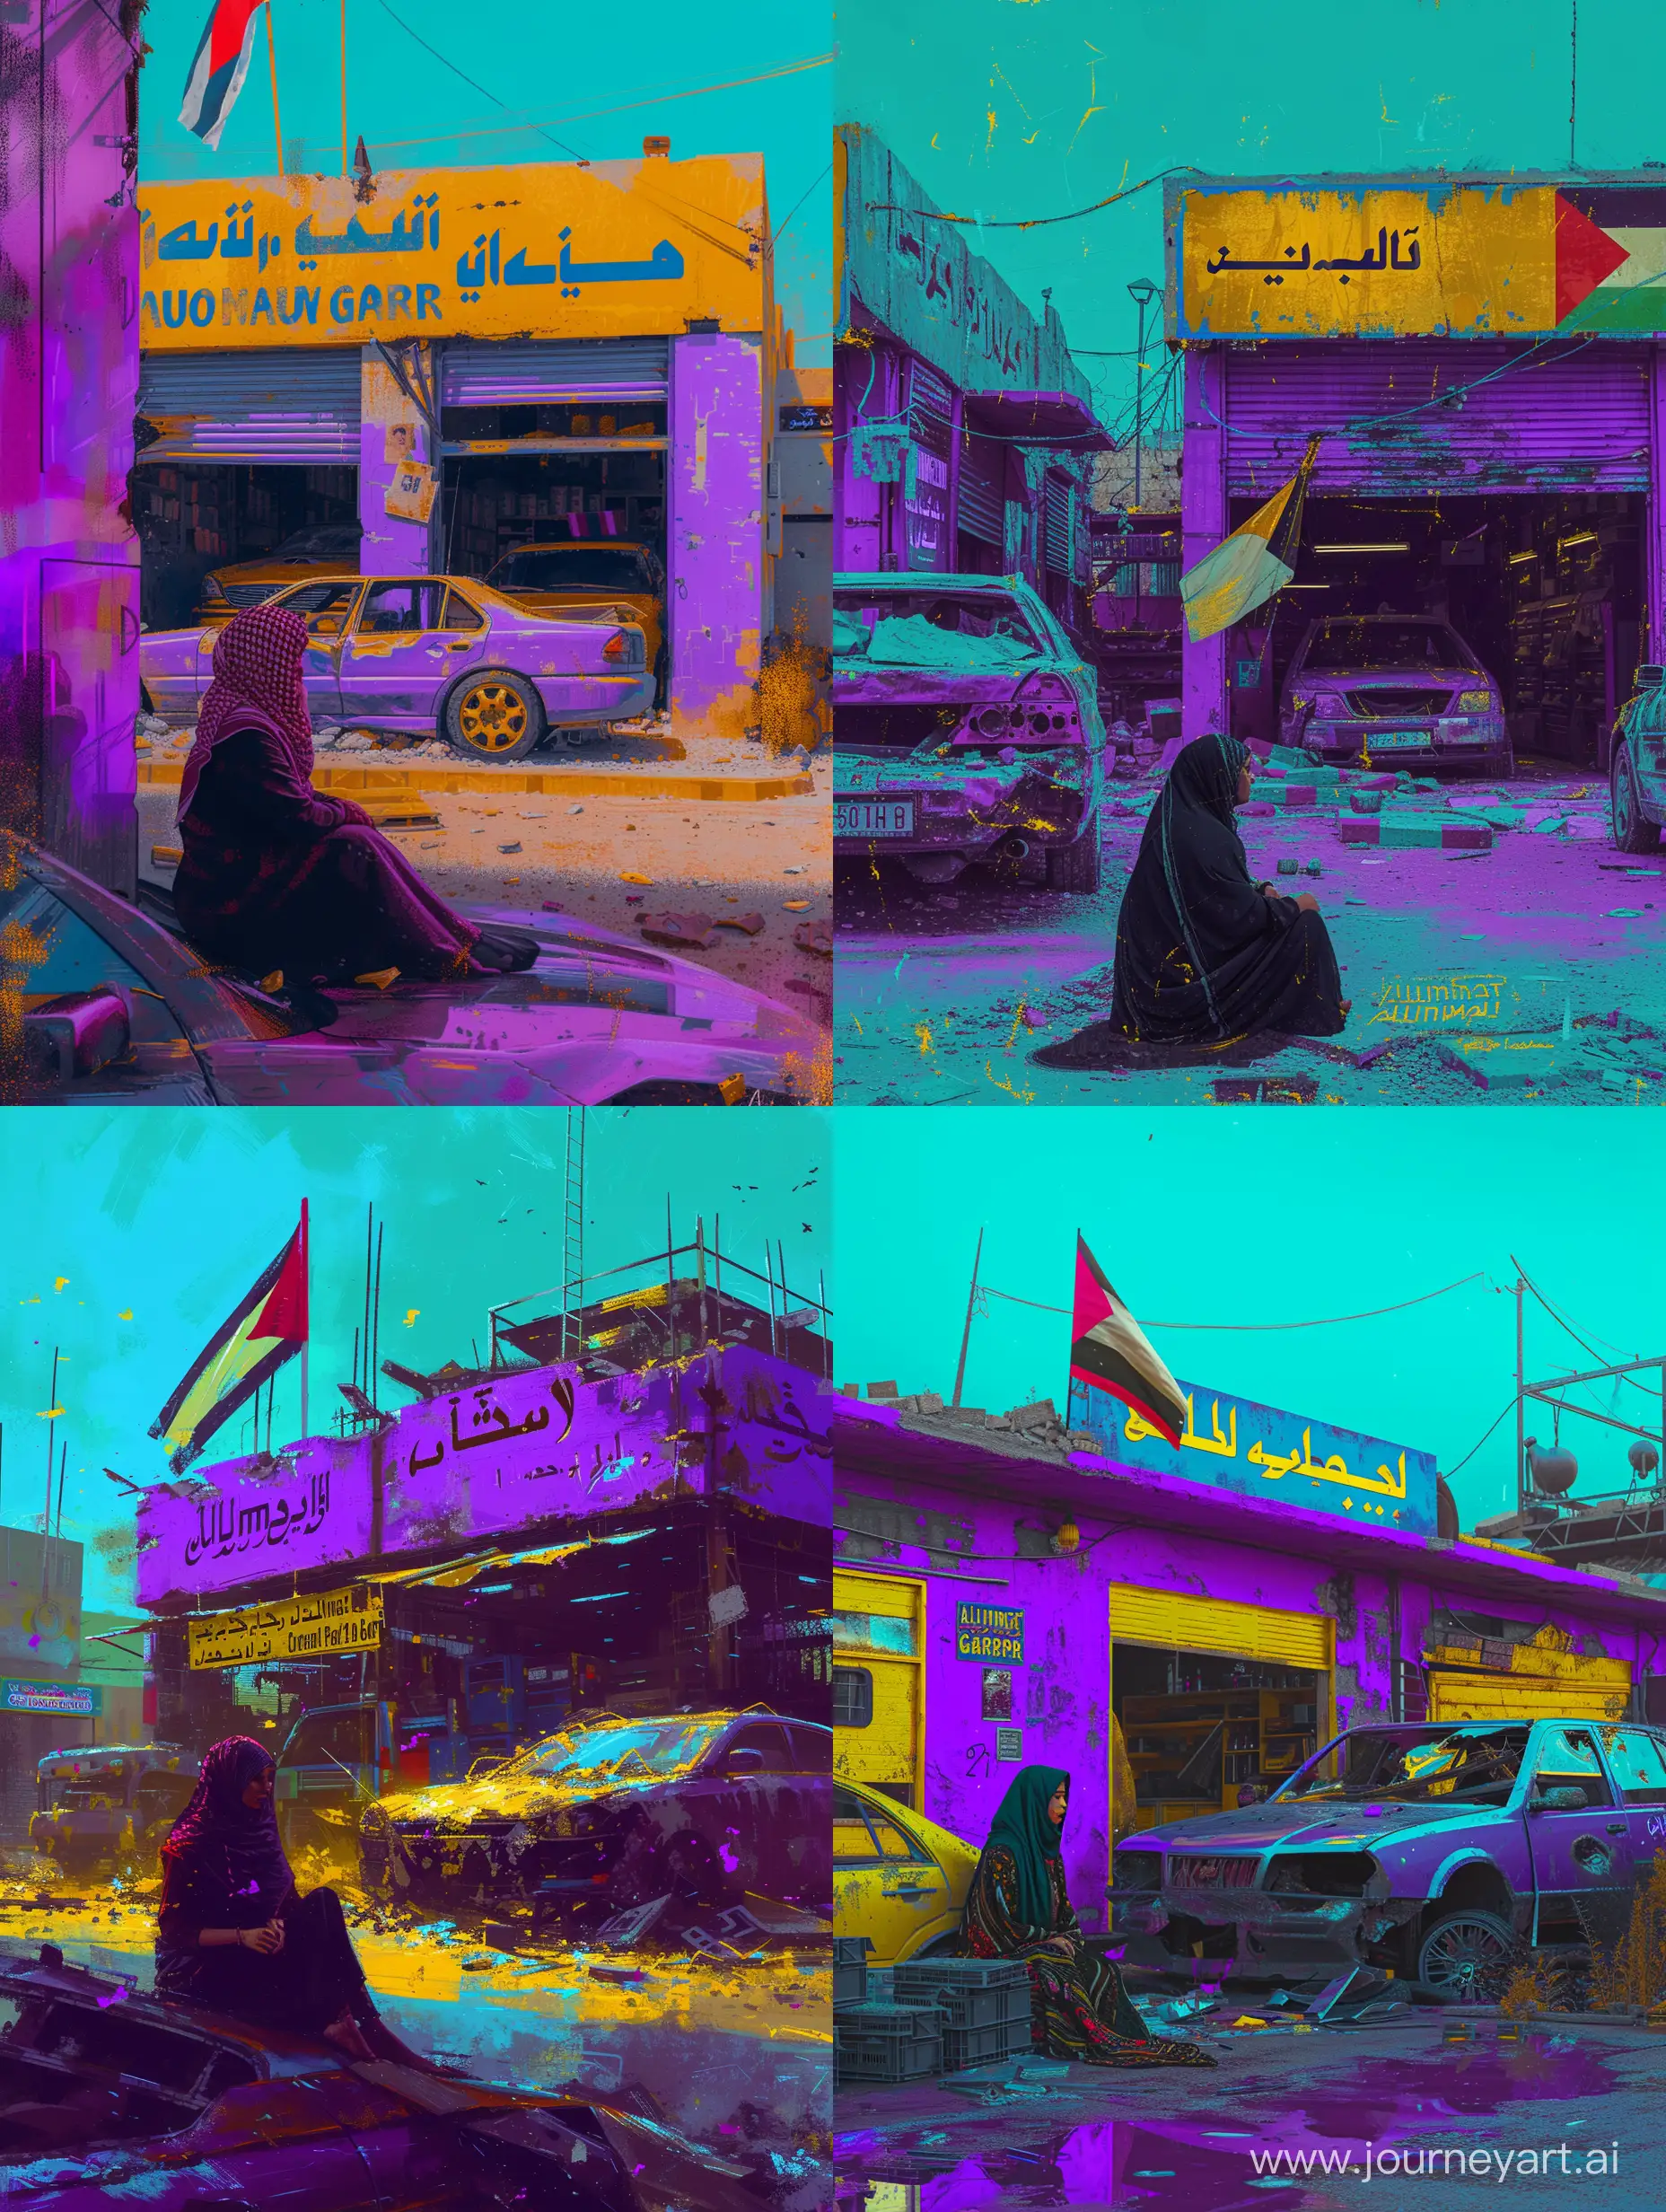 extra realistic a Palestinian woman is sitting in front of a car workshop that was destroyed by a bomb attack. workshops are purple and yellow. There is a Palestinian flag. a sign that says 'Altimat Auto Garage'. refraction of blue and yellow light. morning mood